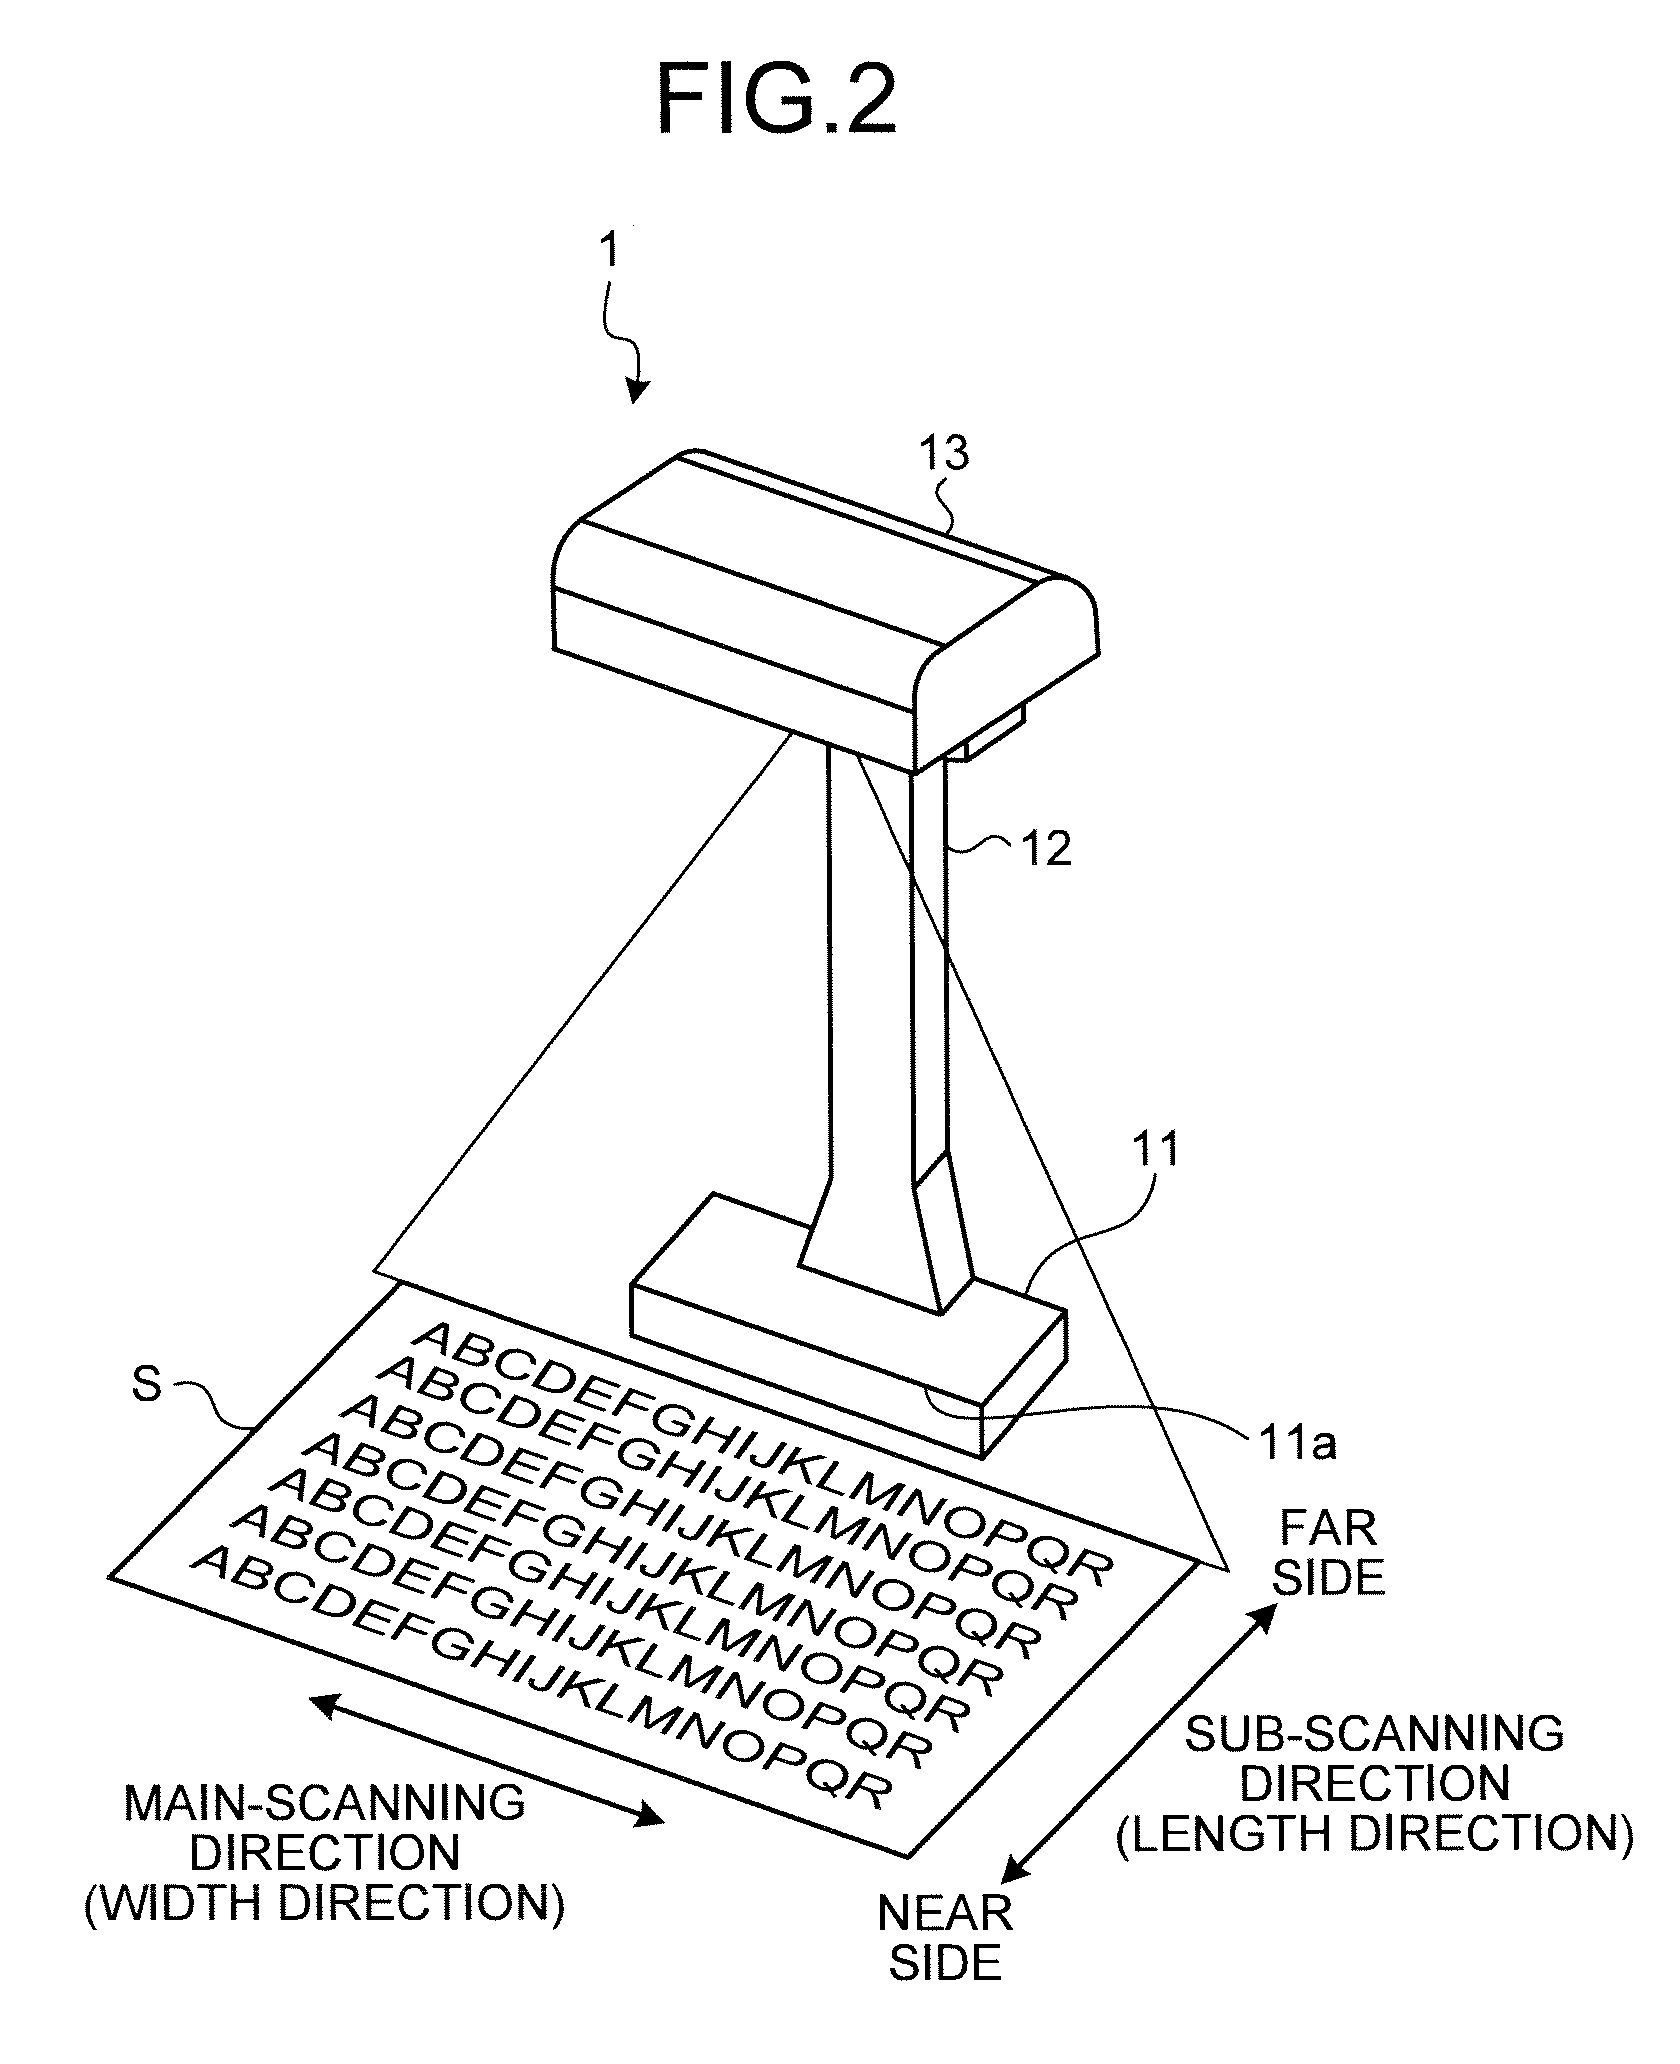 Image-reading apparatus, image processing method, and computer program product